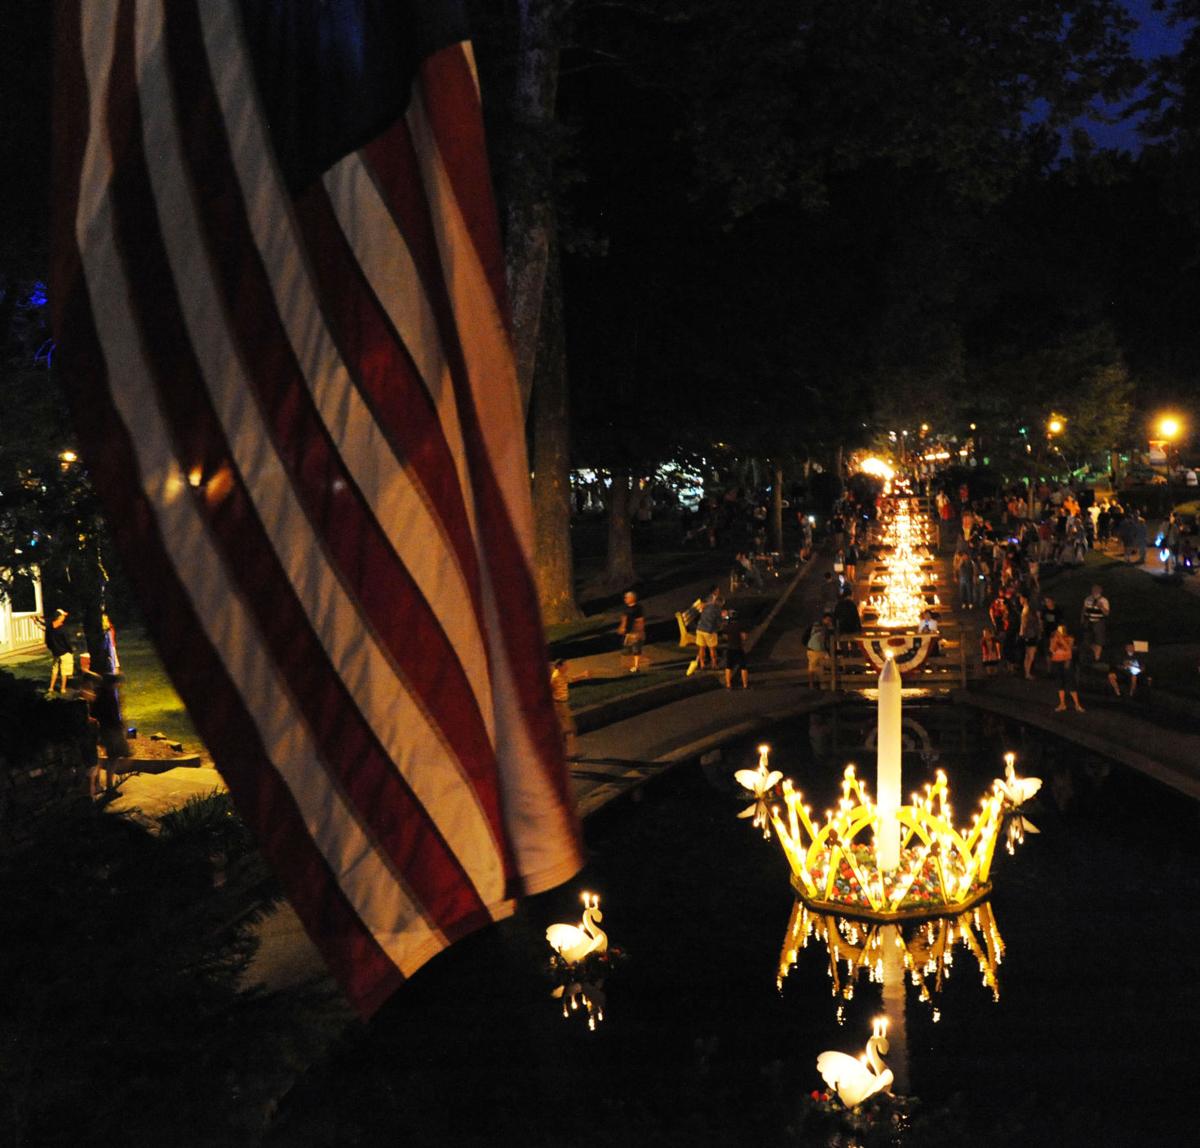 Queen of Candles, fireworks bring Lititz Springs Park's celebration of